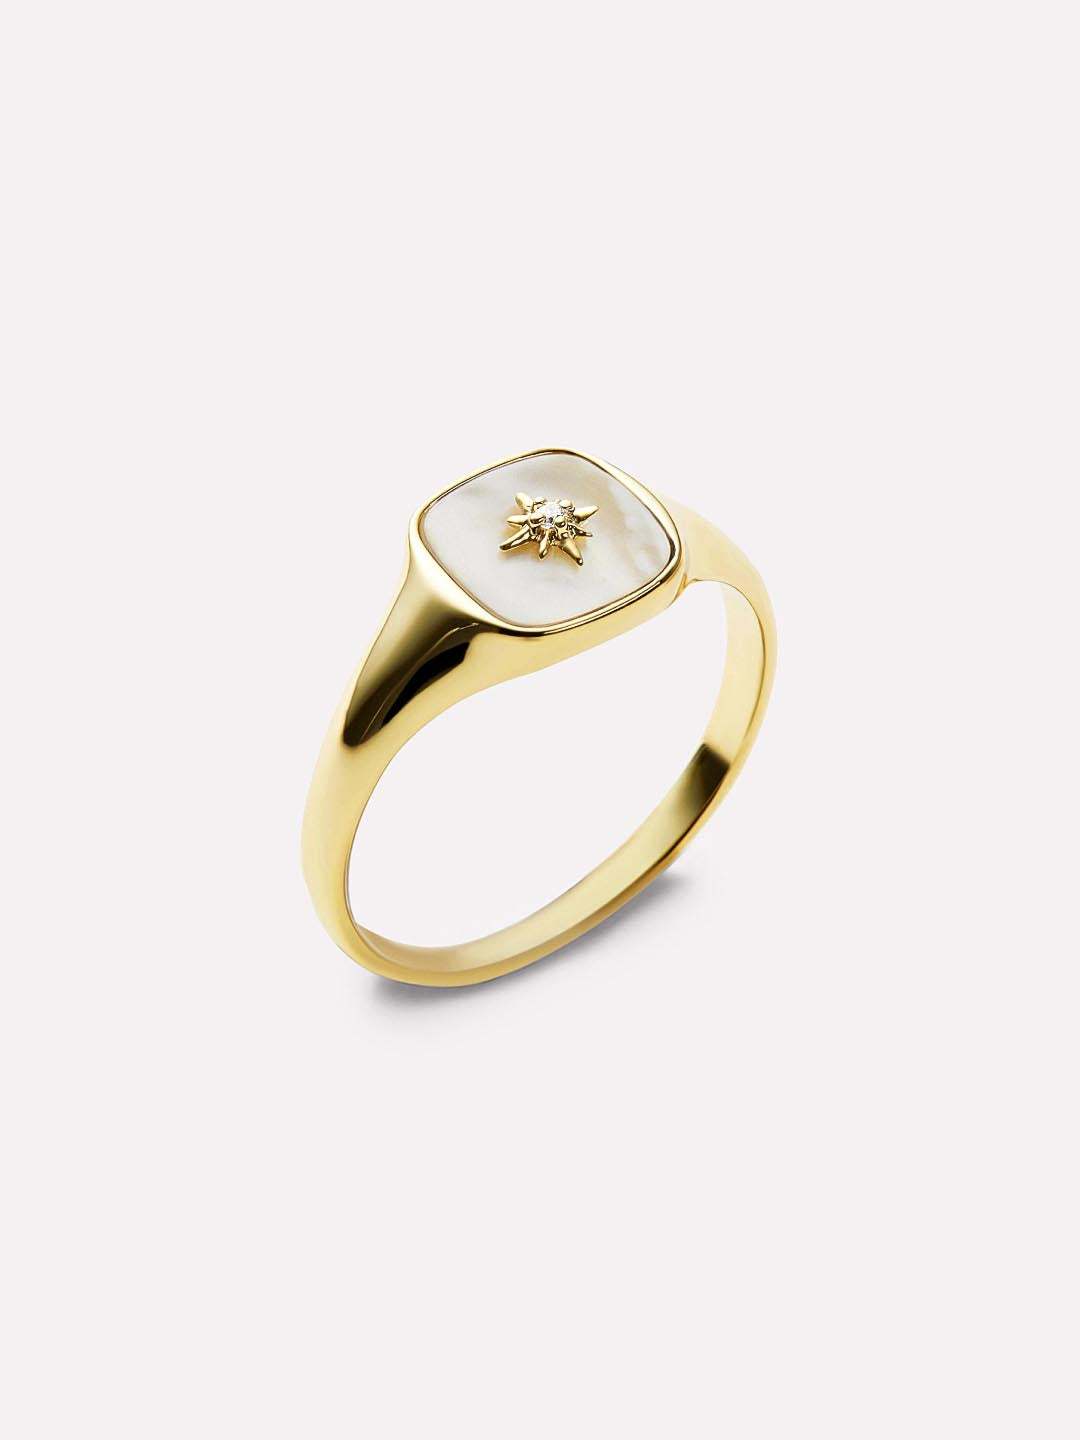 Gold Signet Ring - Amara Mother of Pearl | Ana Luisa Jewelry